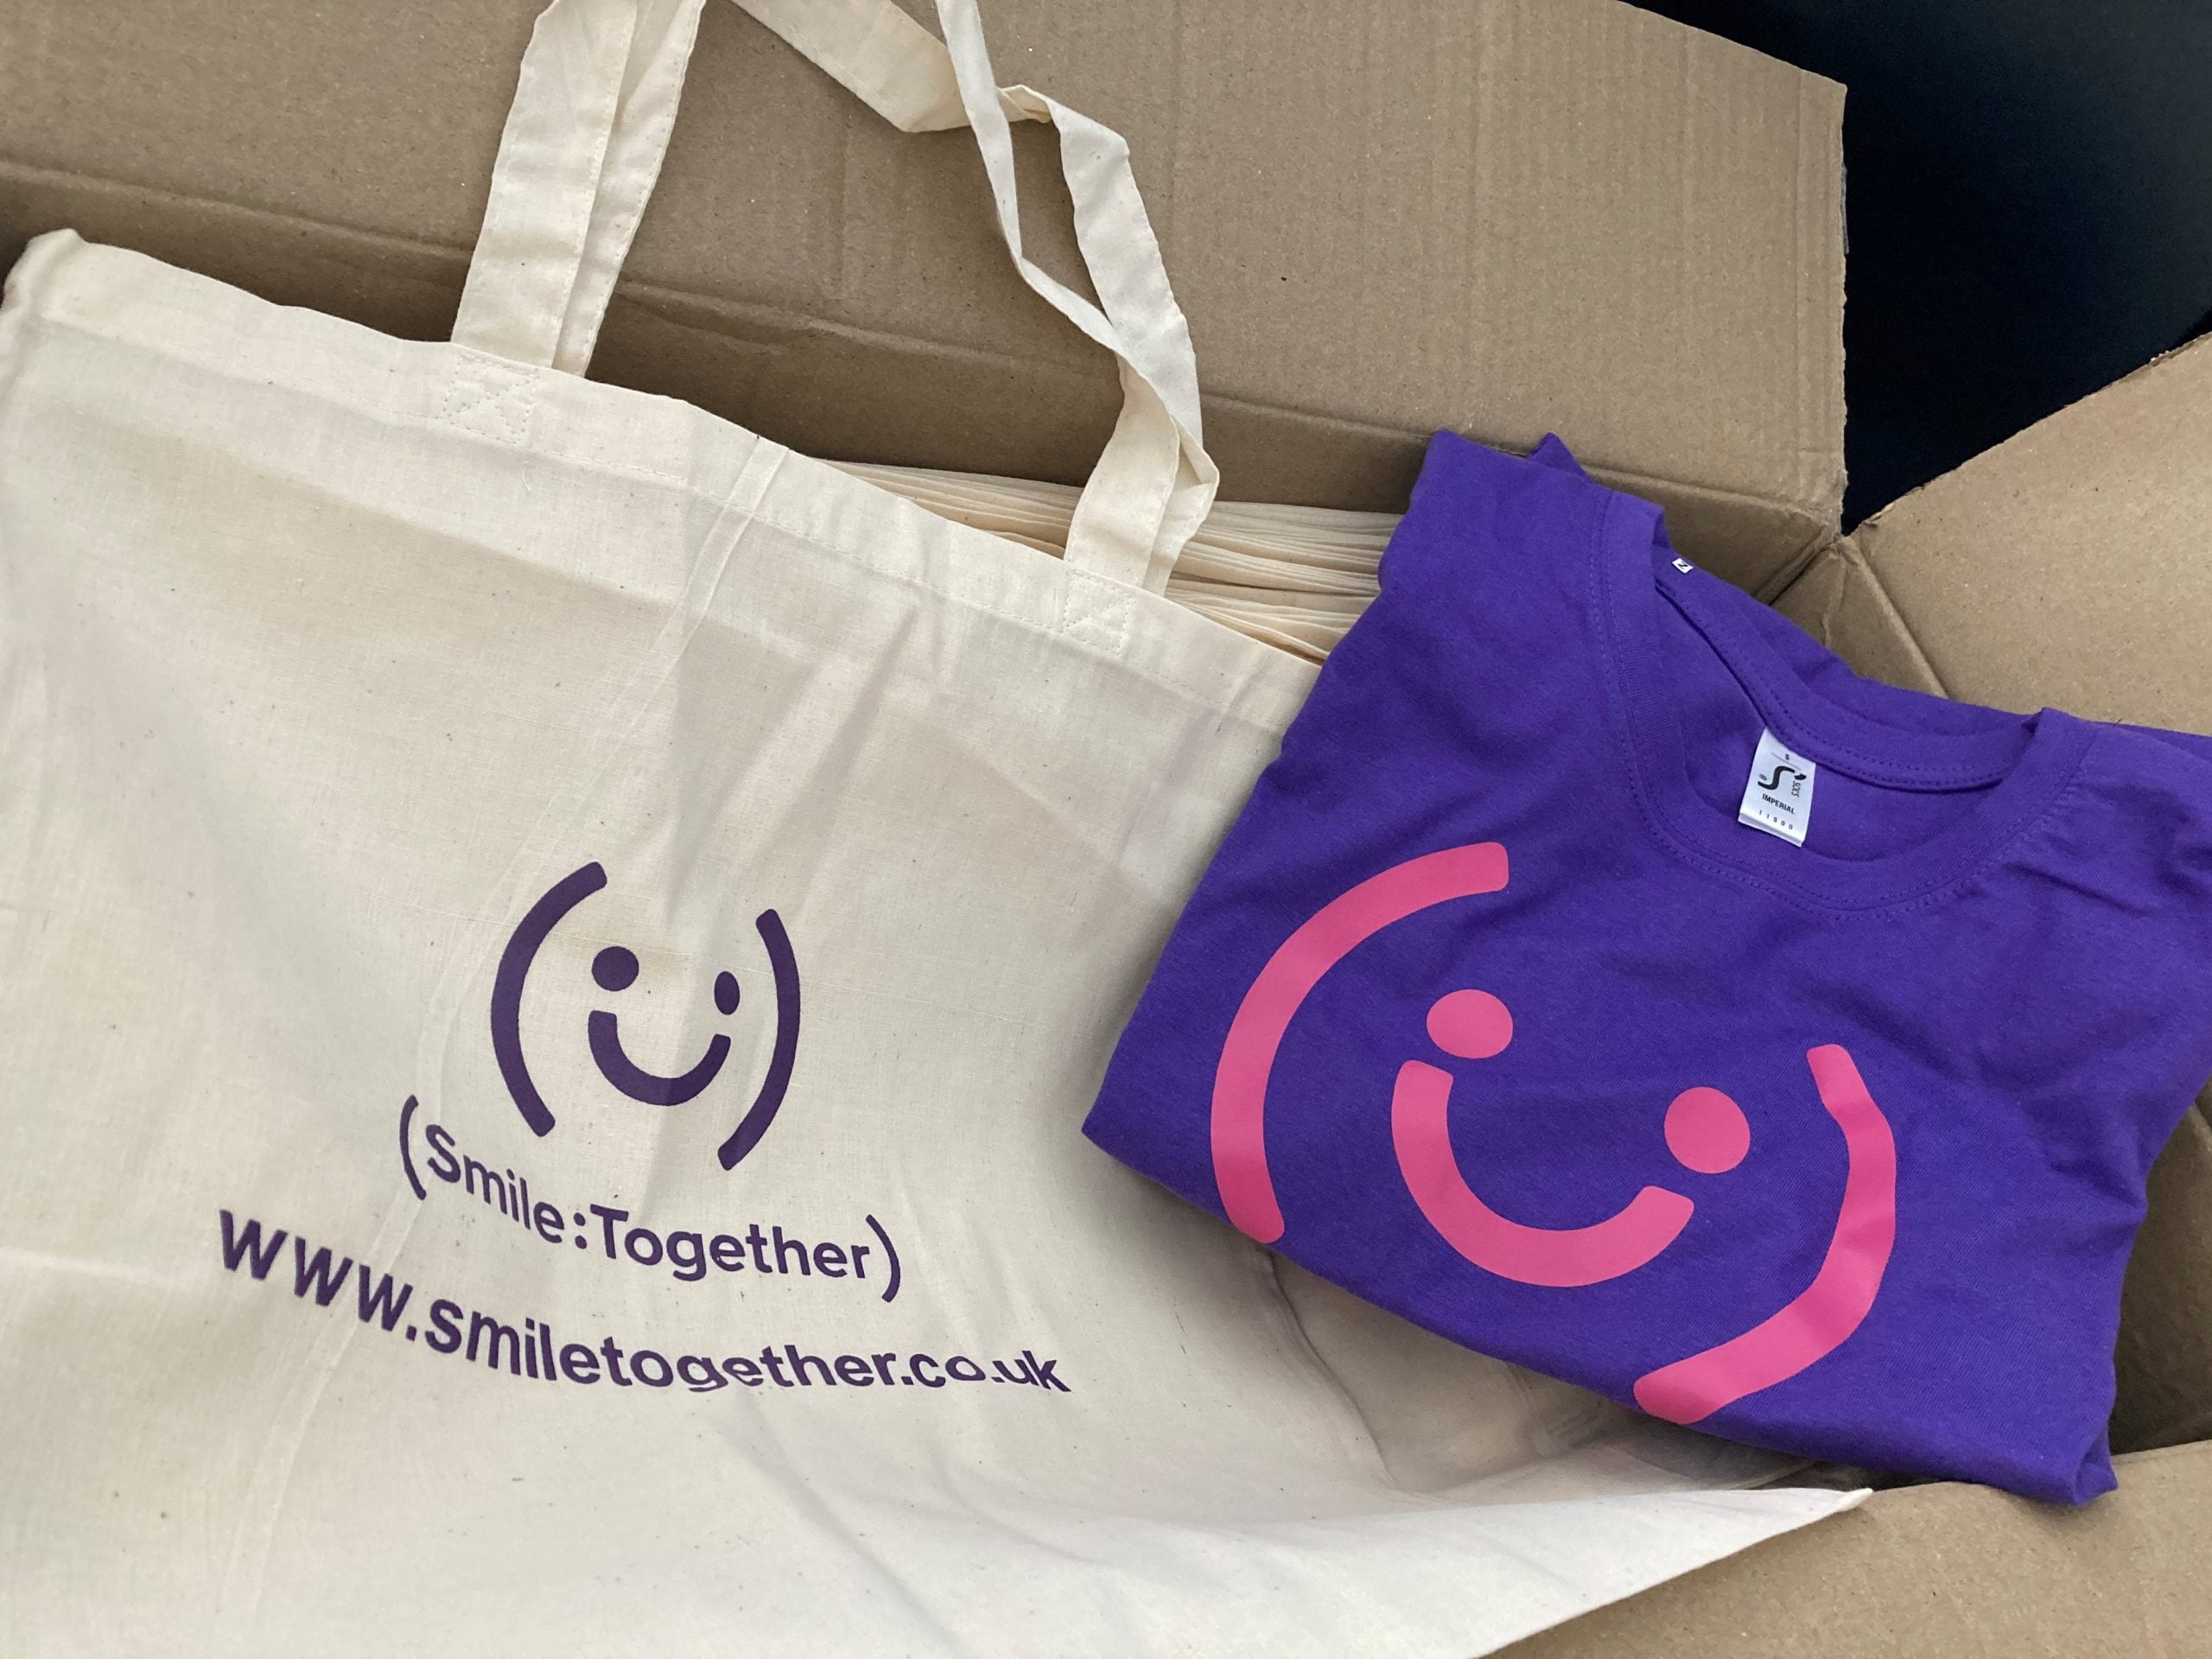 Smile Together branded T-shirts and tote bags